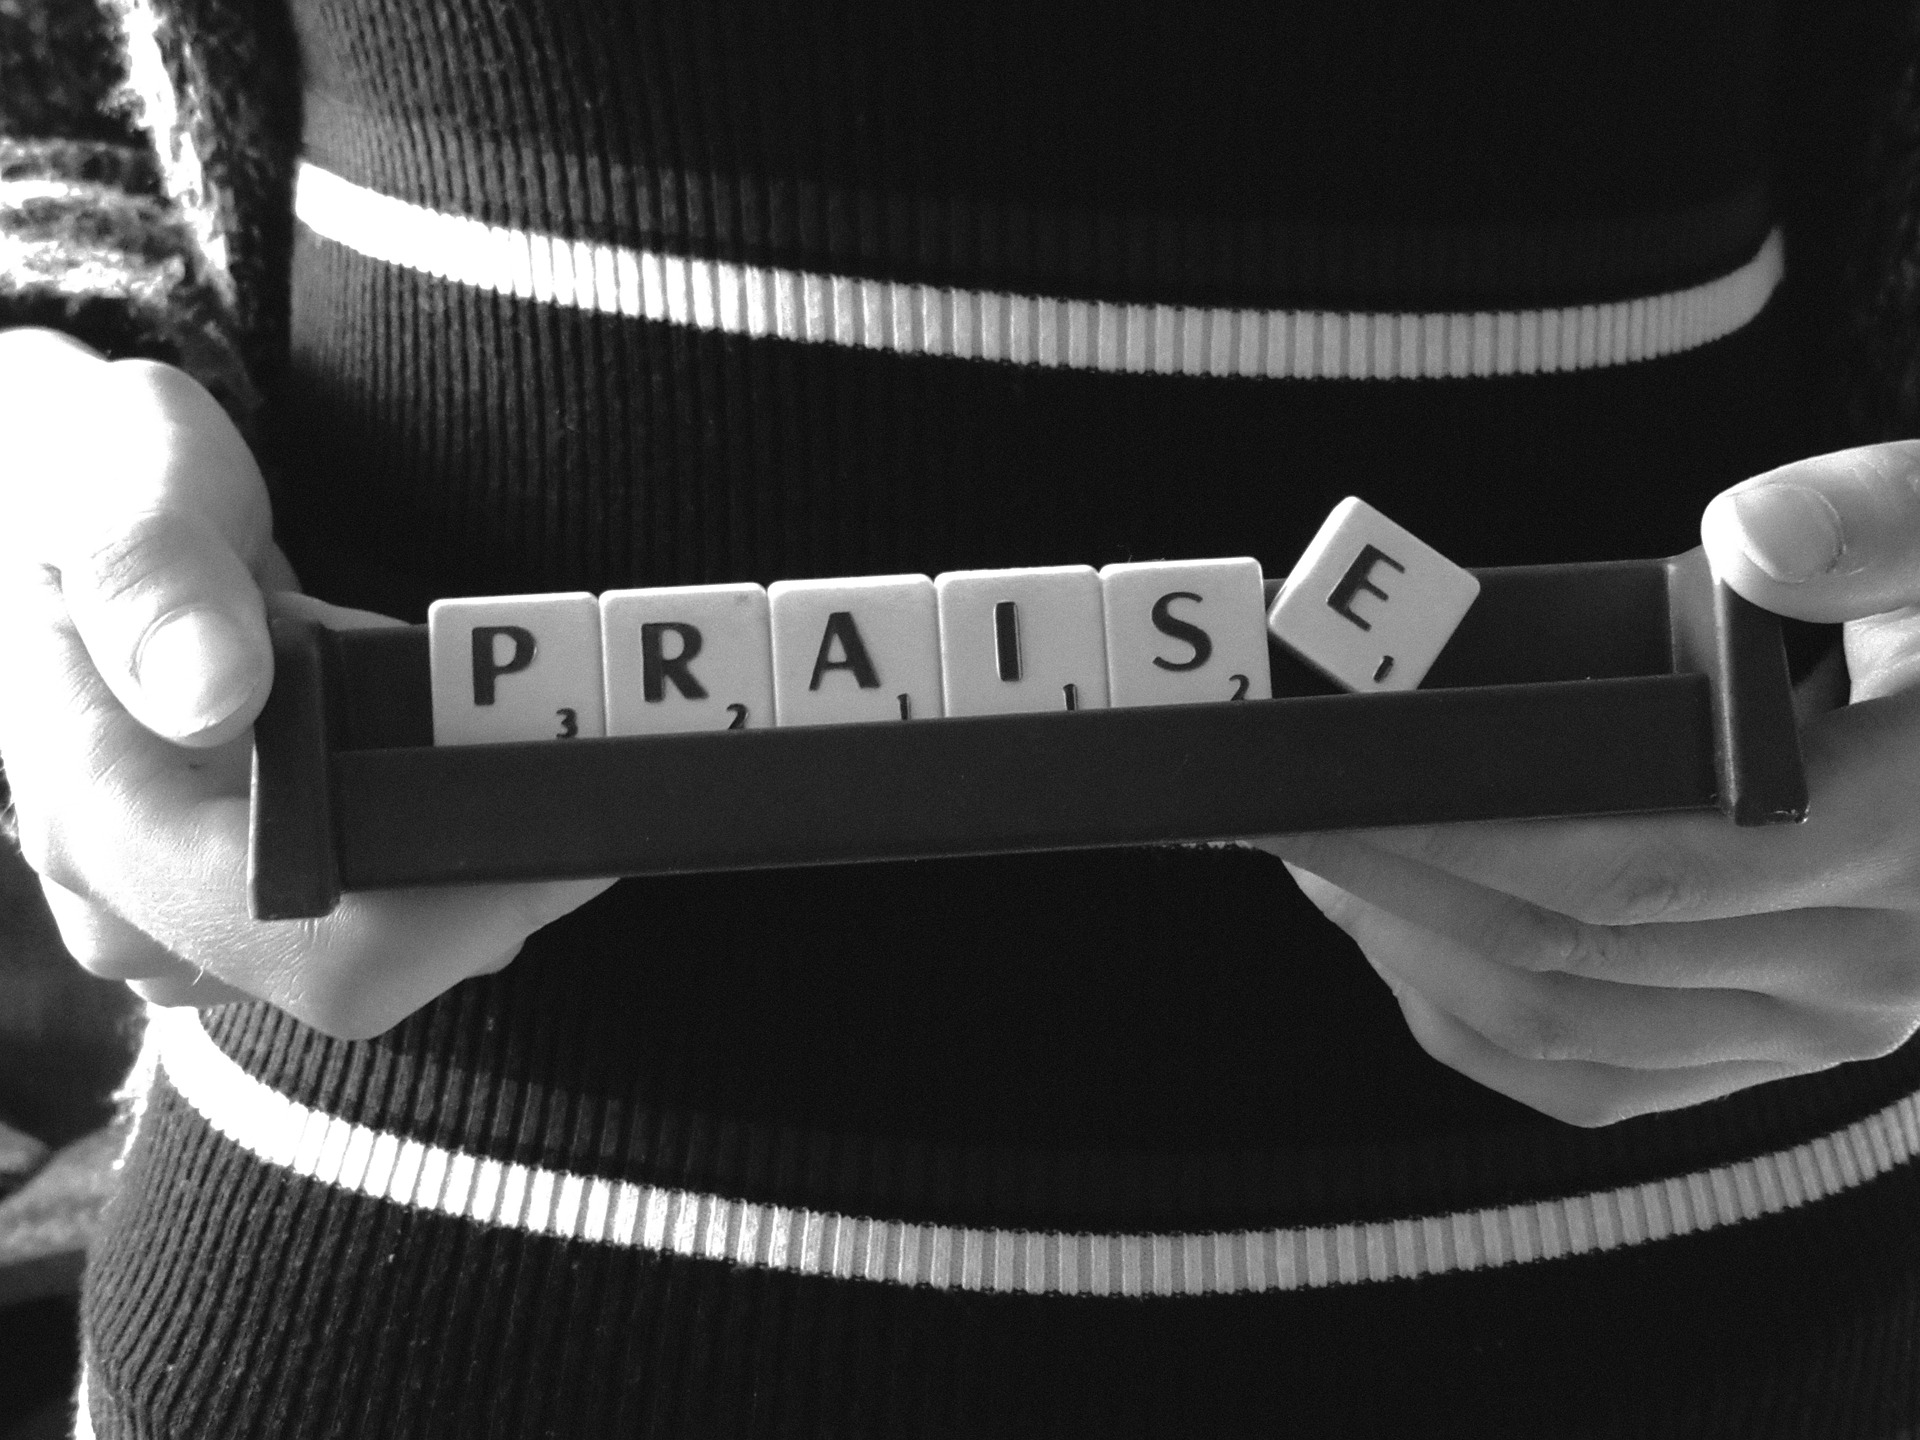 PRAISE scrabble: How to Praise your child